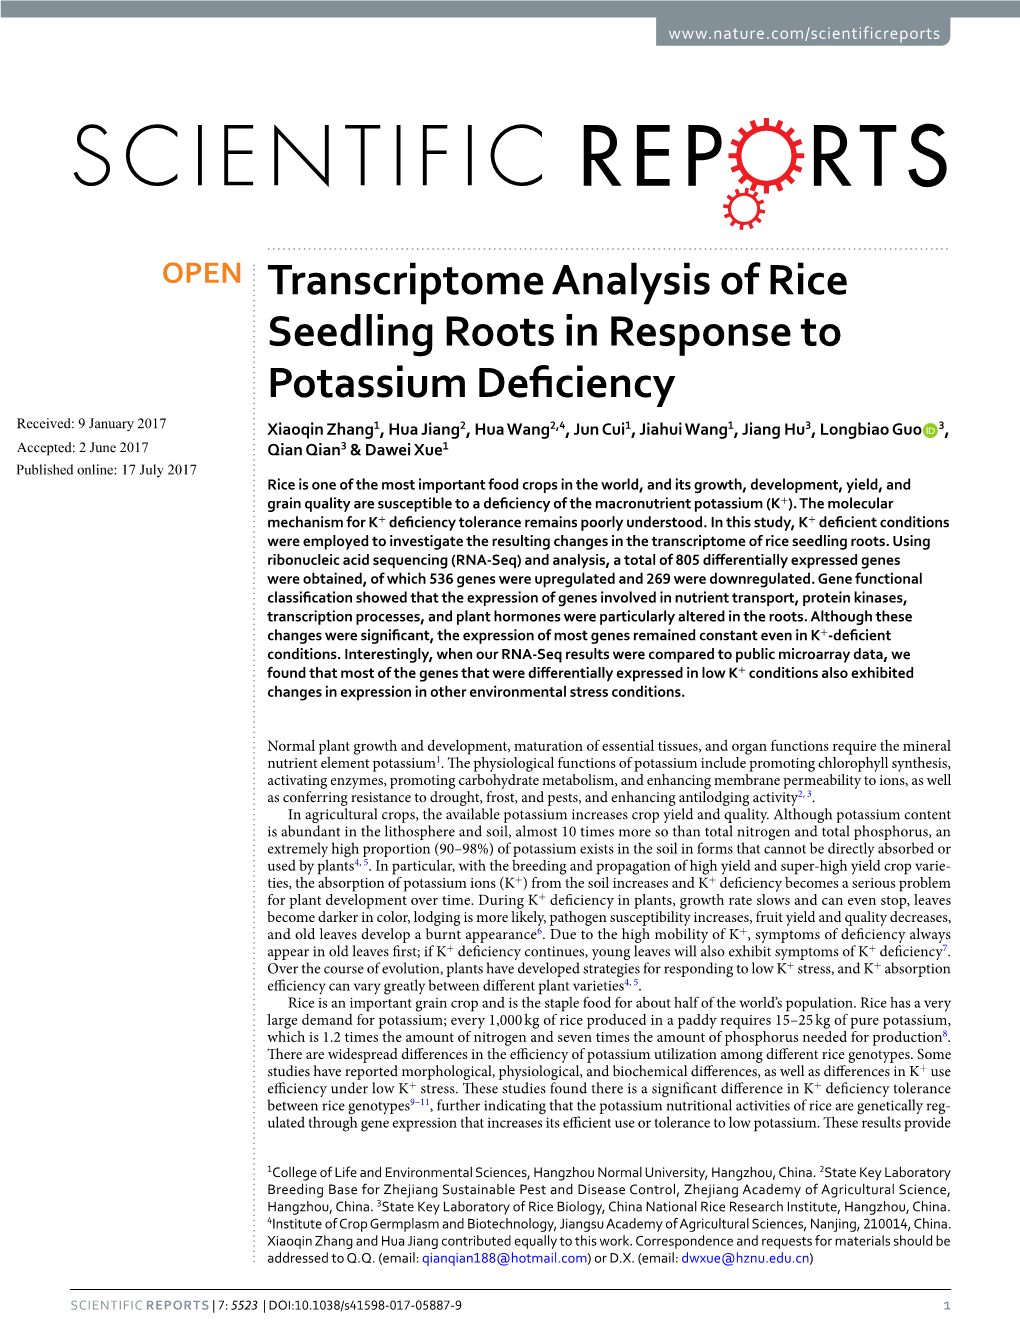 Transcriptome Analysis of Rice Seedling Roots in Response To